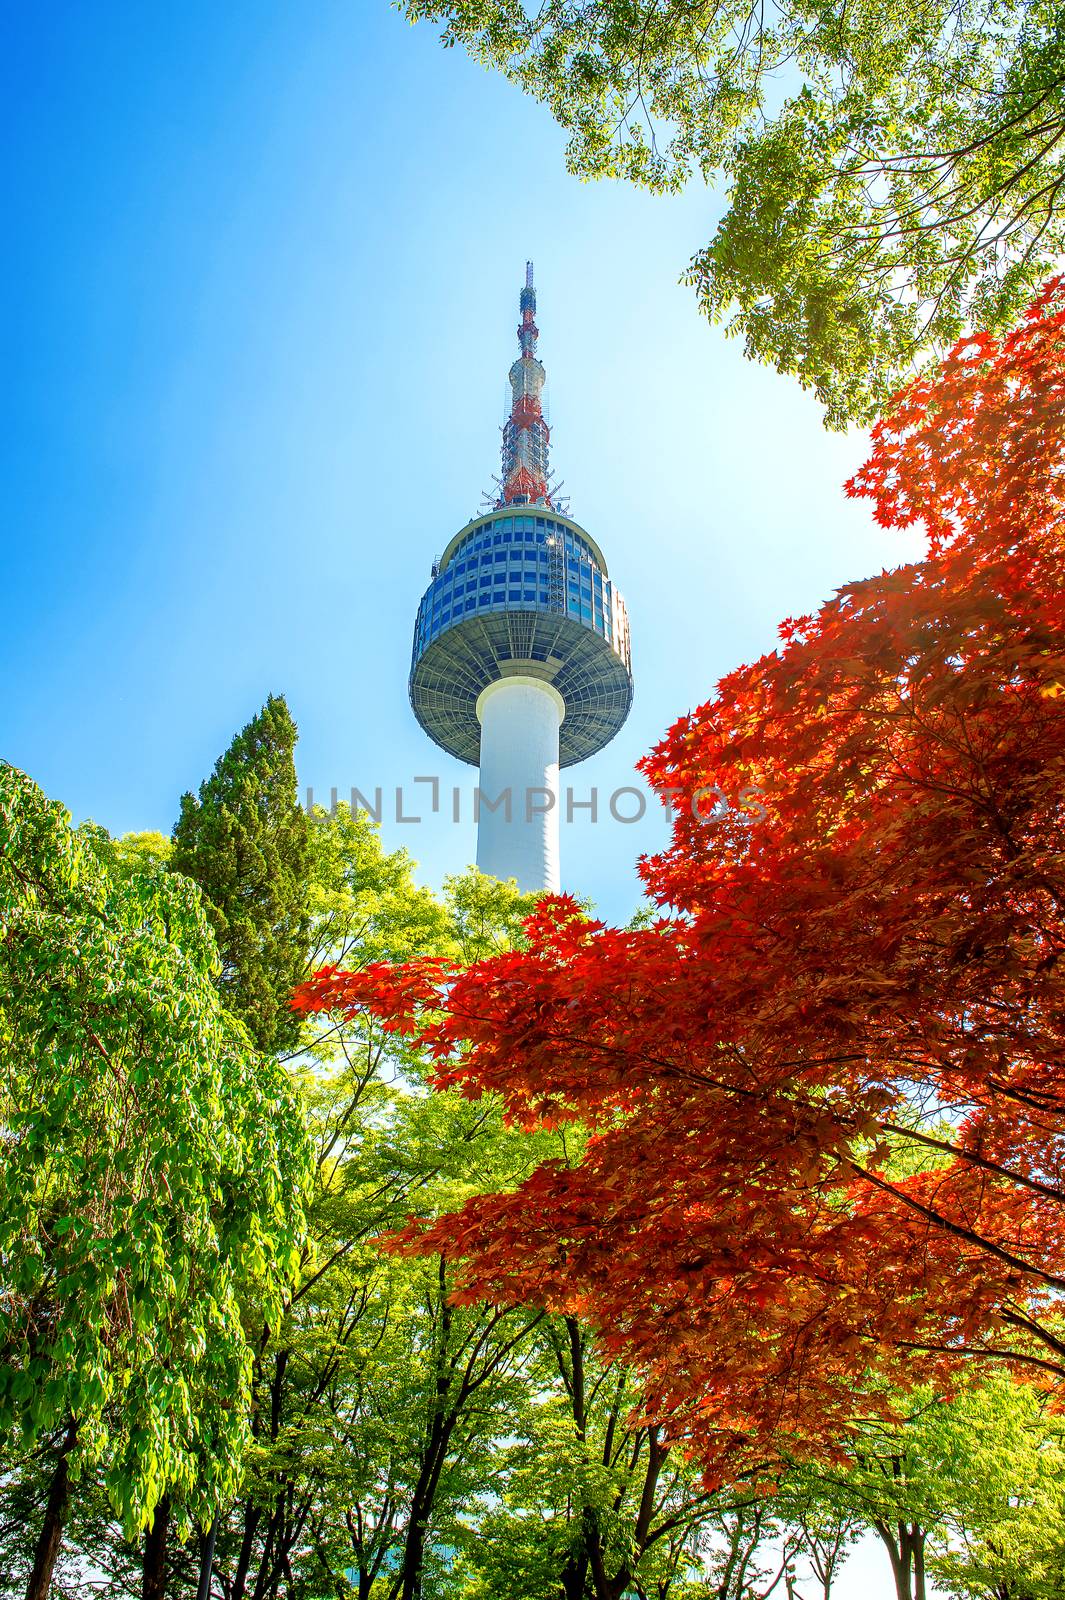 Seoul Tower and red autumn maple leaves at Namsan mountain in South Korea. by gutarphotoghaphy